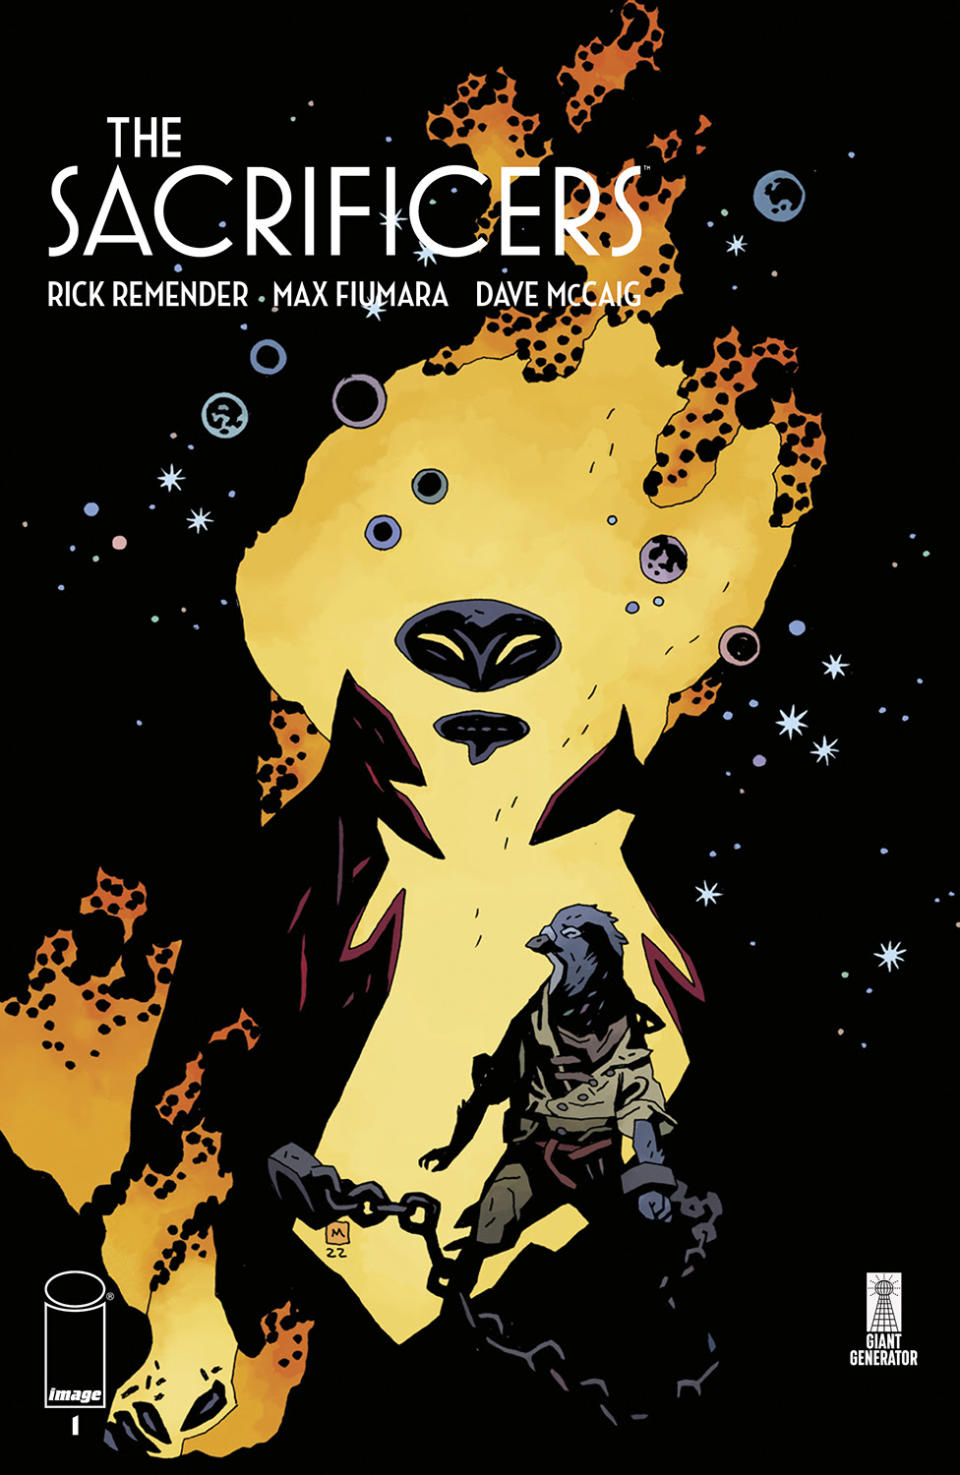 Mike Mignola's cover for The Sacrificers.